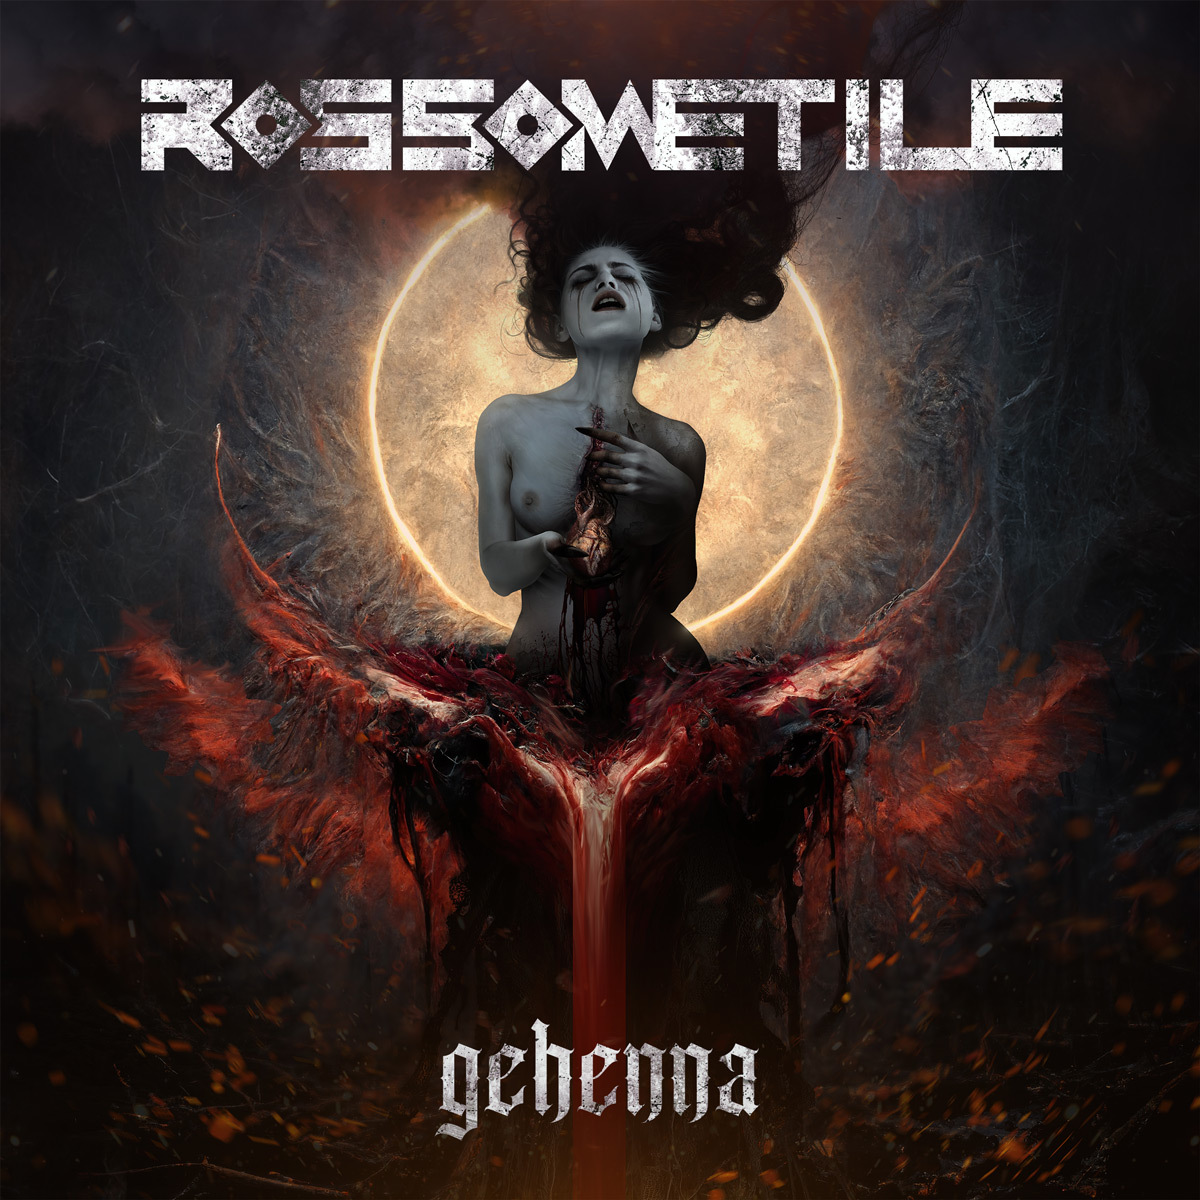 ROSSOMETILE: Italian symphonic metal band shares “Gehenna” single, new album out in May